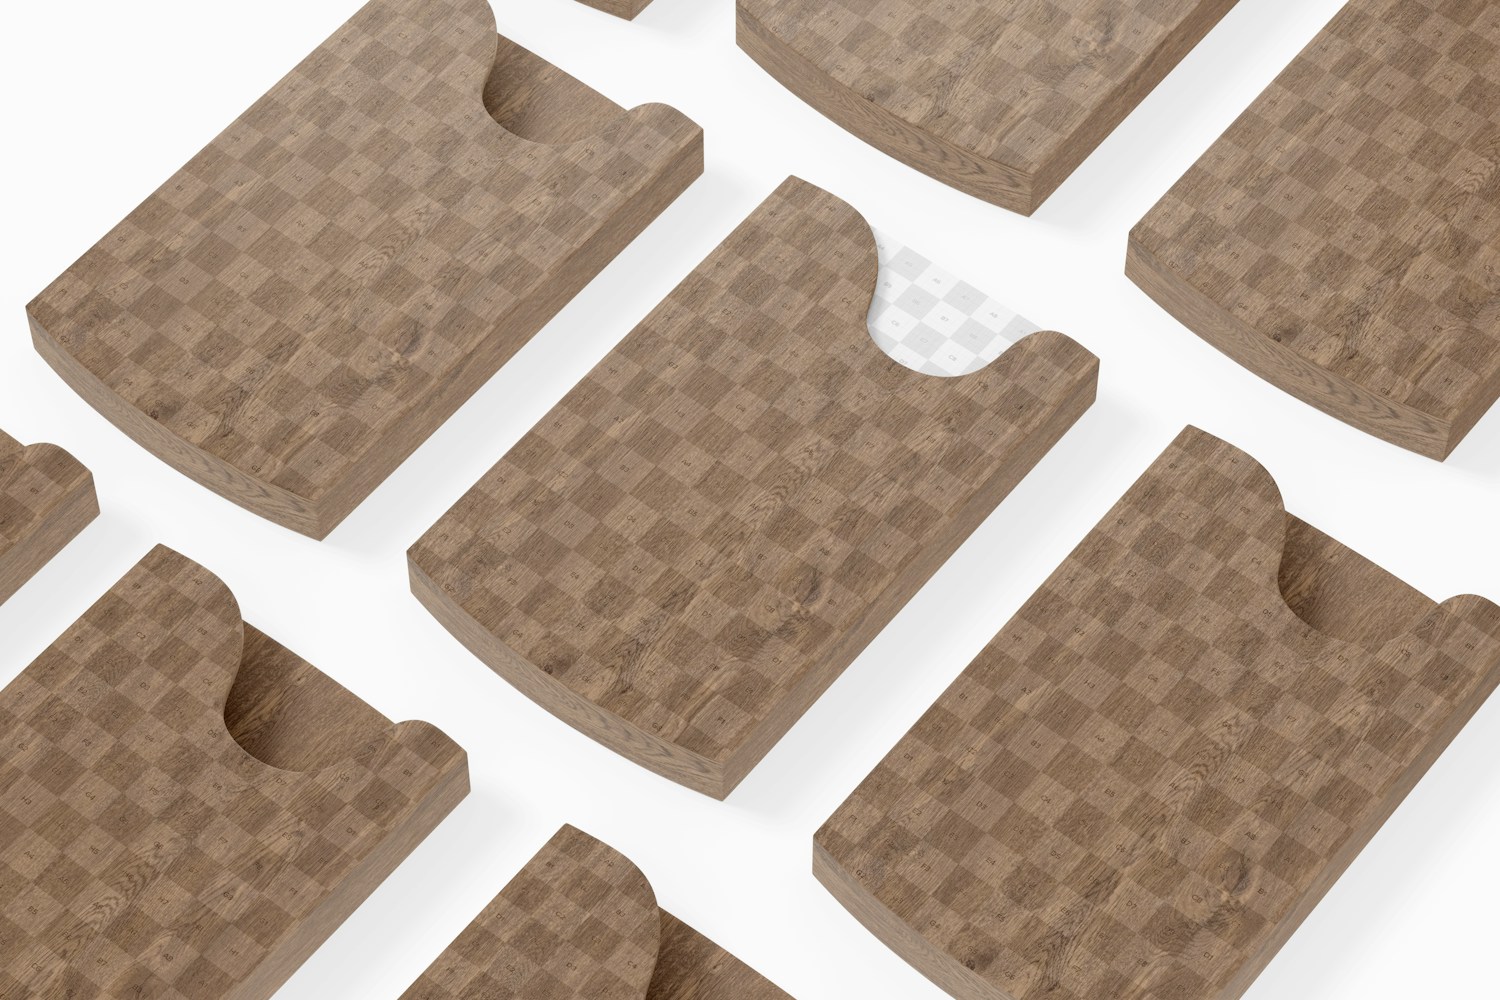 Portable Wooden Business Card Holders Mockup, Mosaic